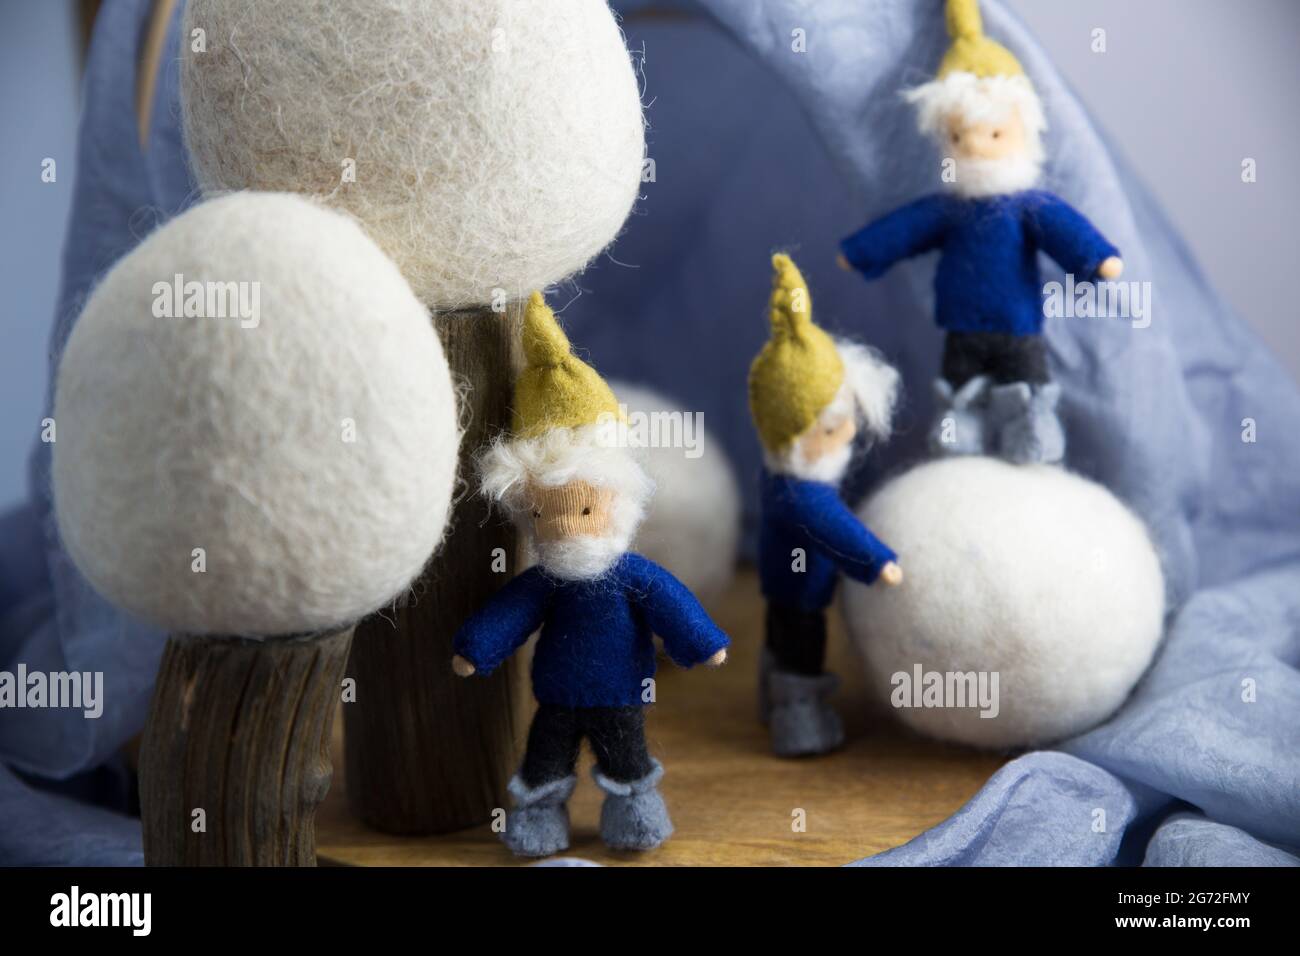 Three knitted fictional characters - dwarves dressed in blue by fluffy white balls in the scene Stock Photo